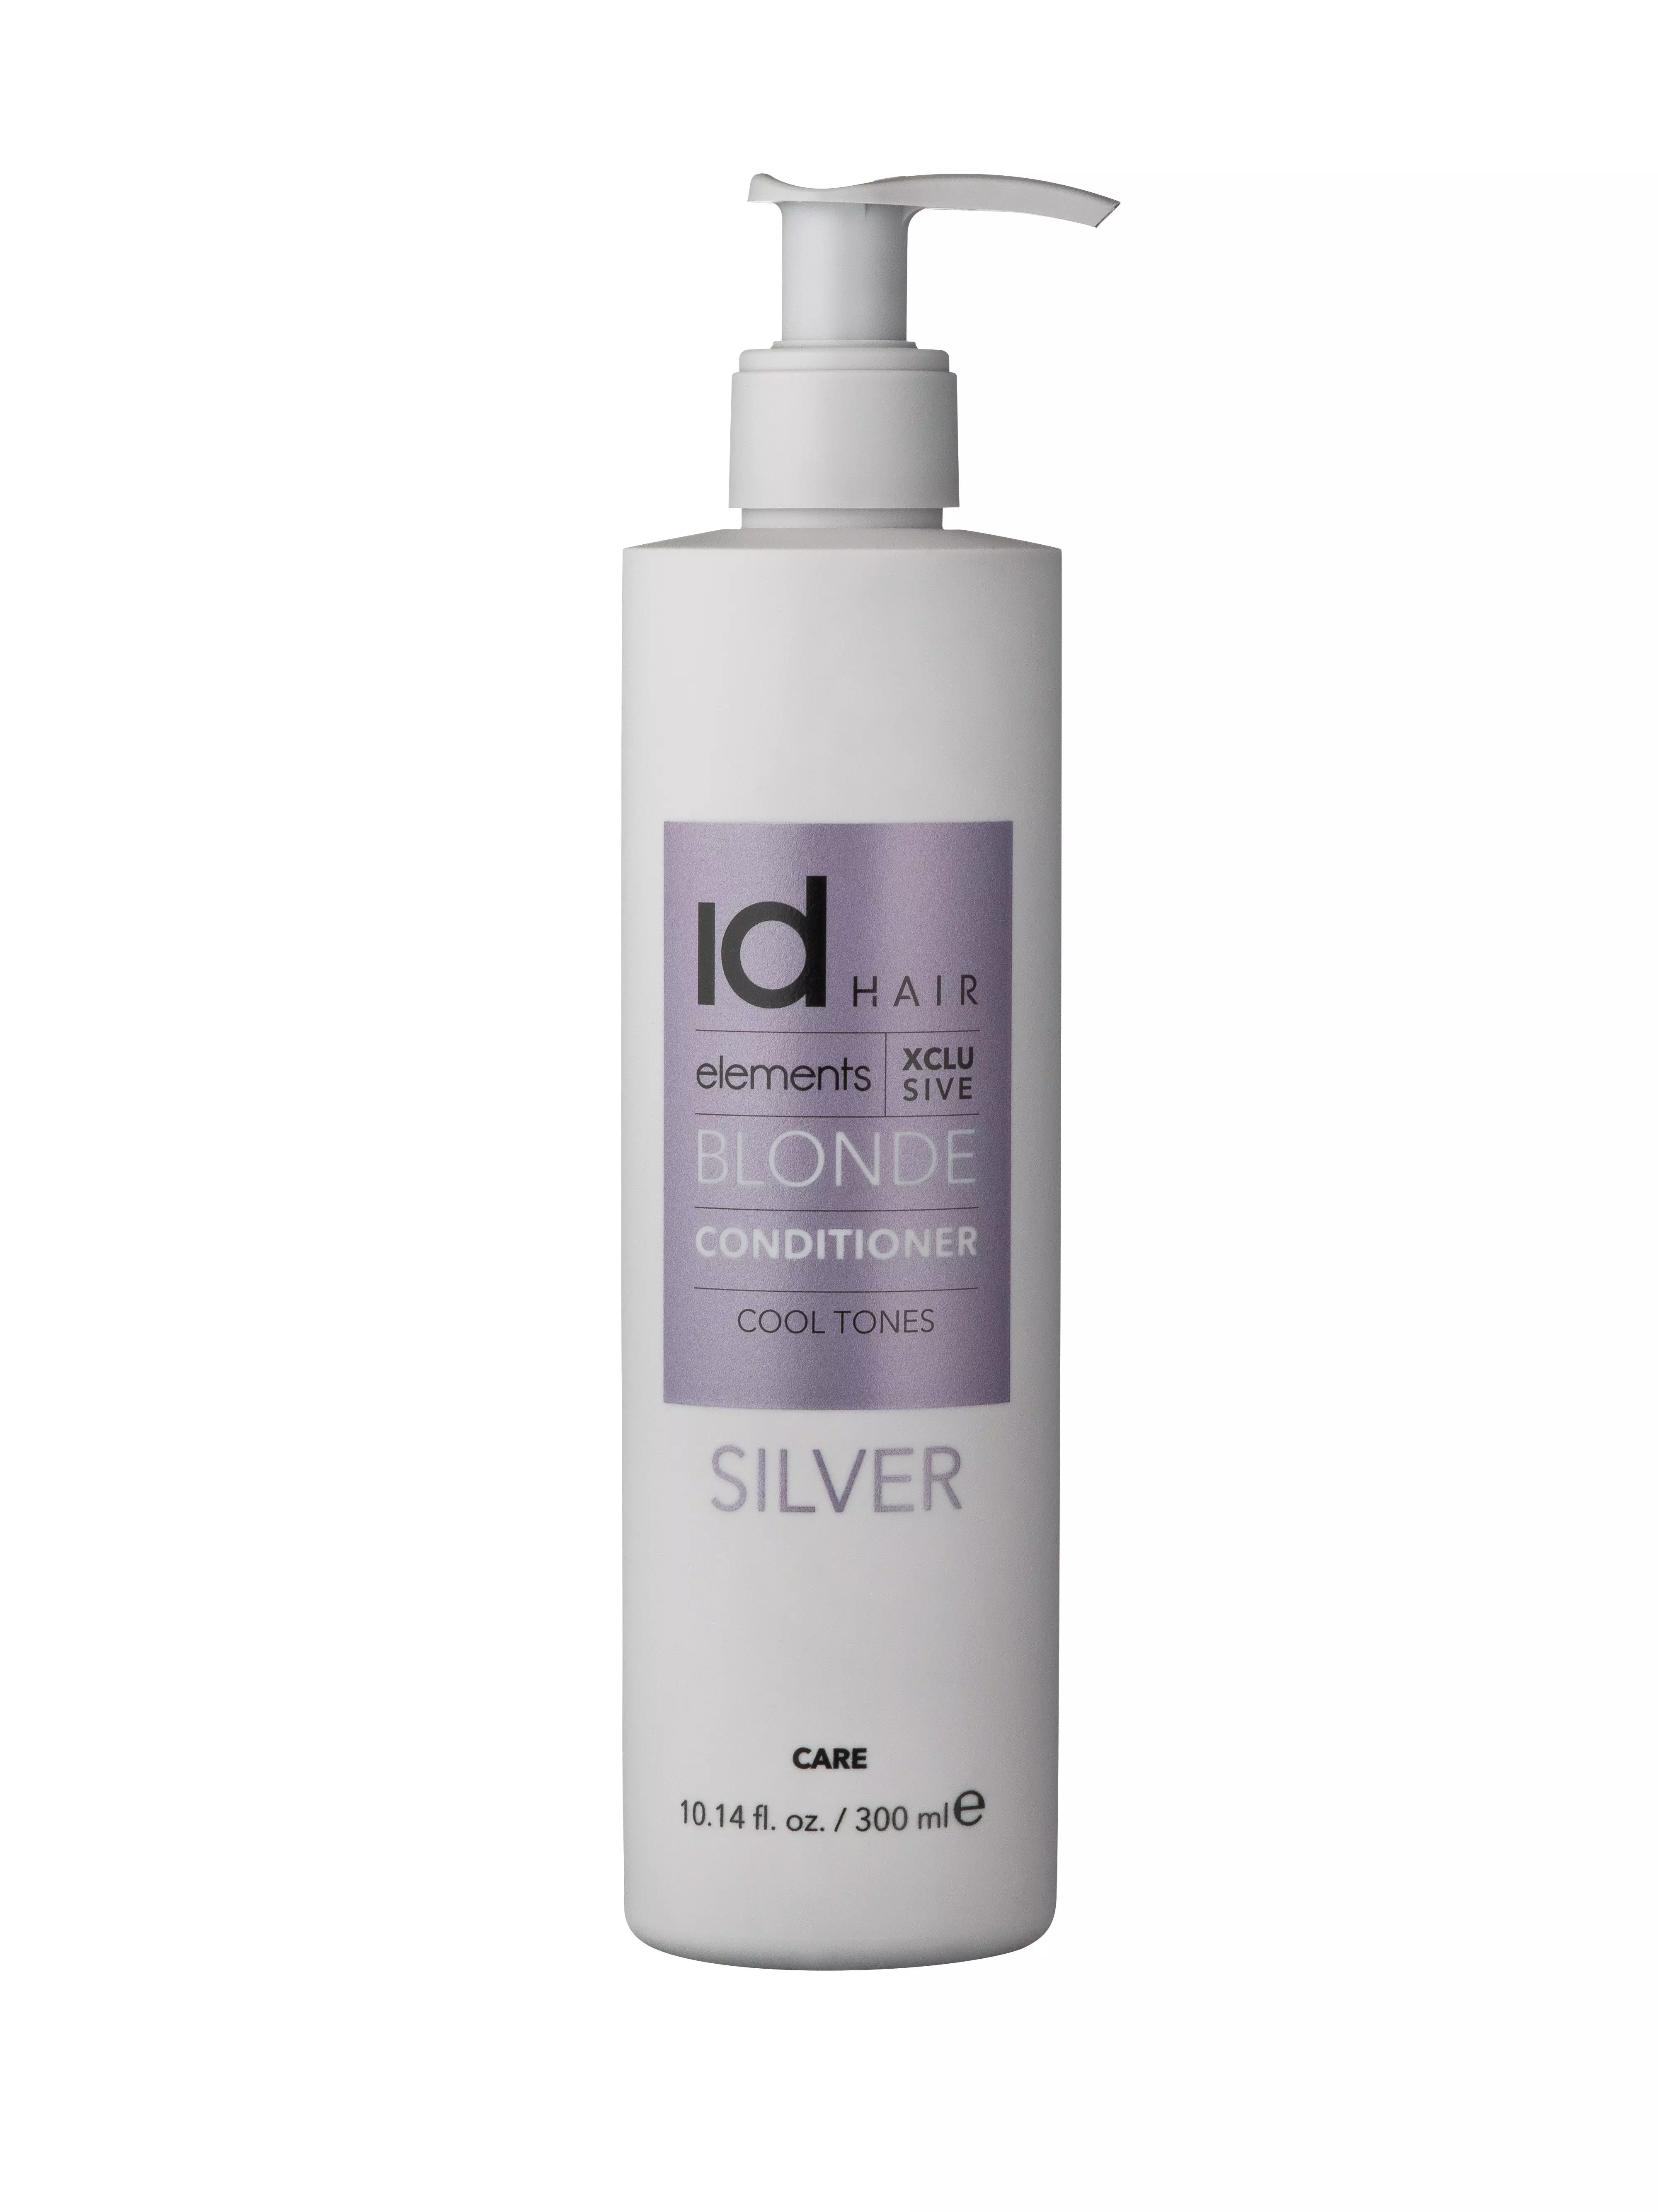 Idhair Elements Xclusive Silver Conditioner Ml